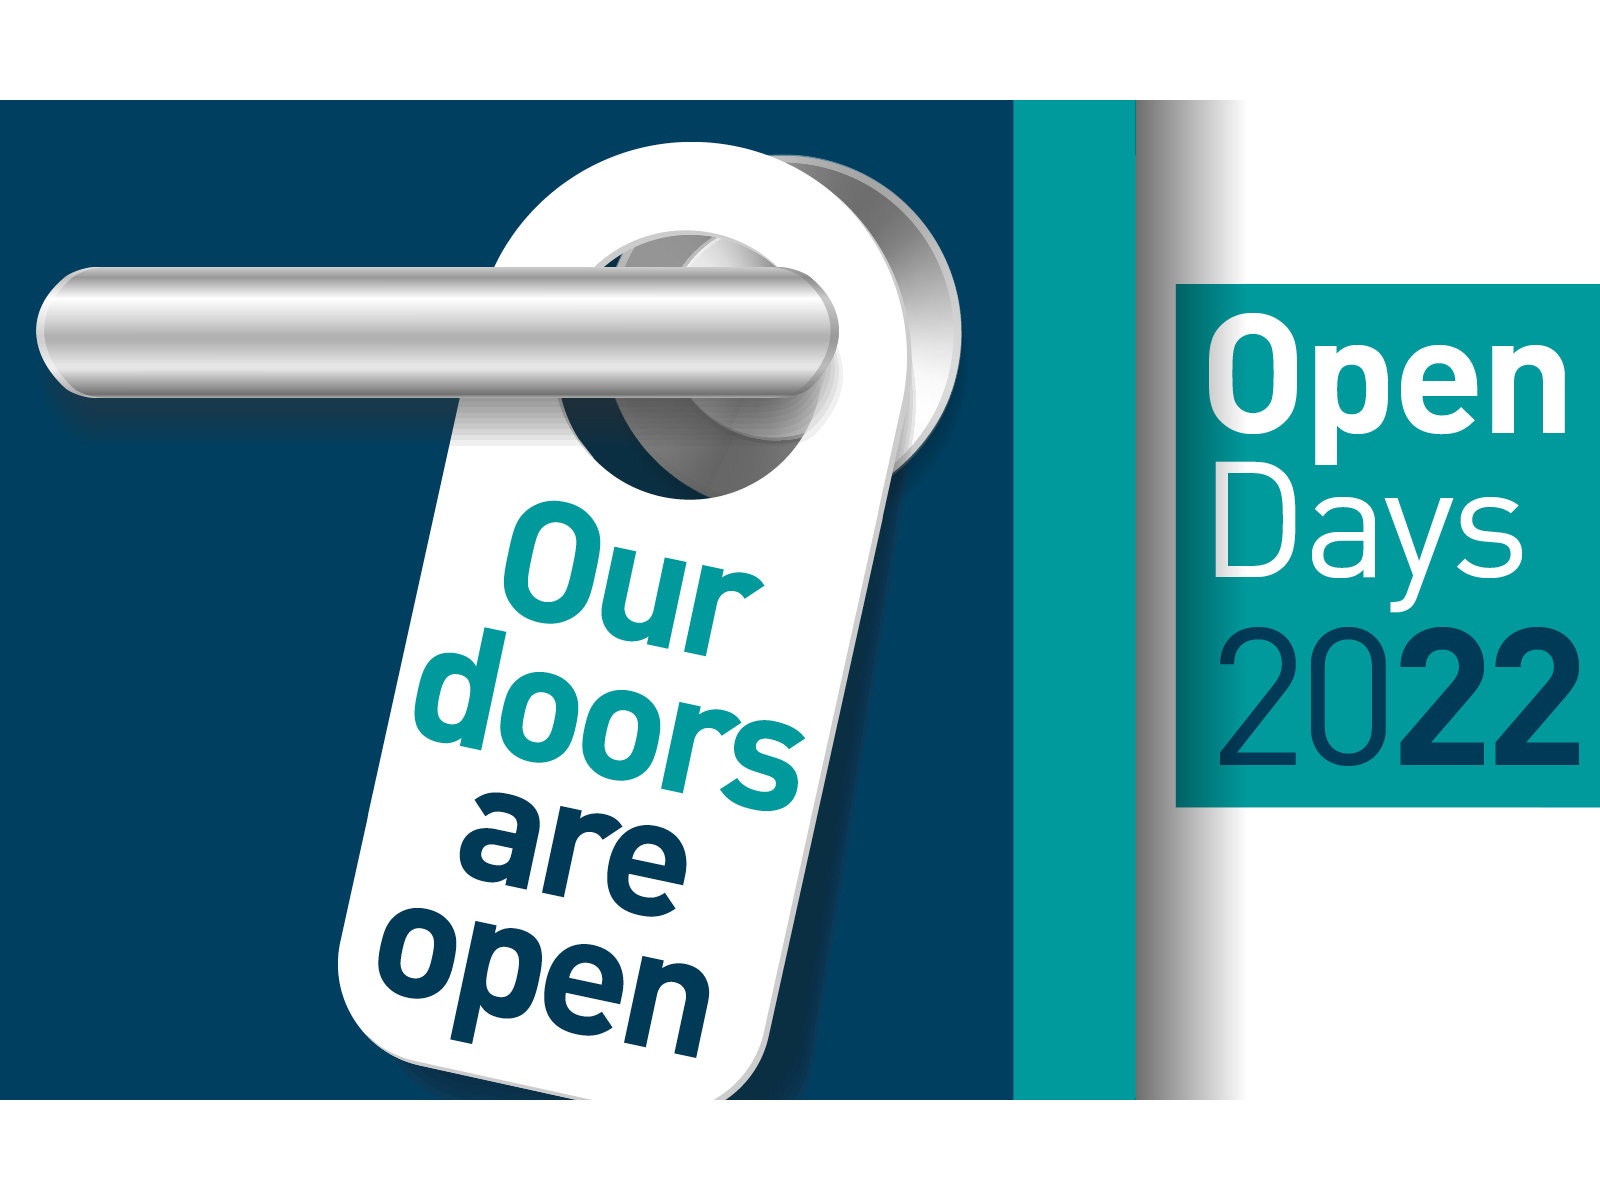 Open Days 2022 - Our doors are open